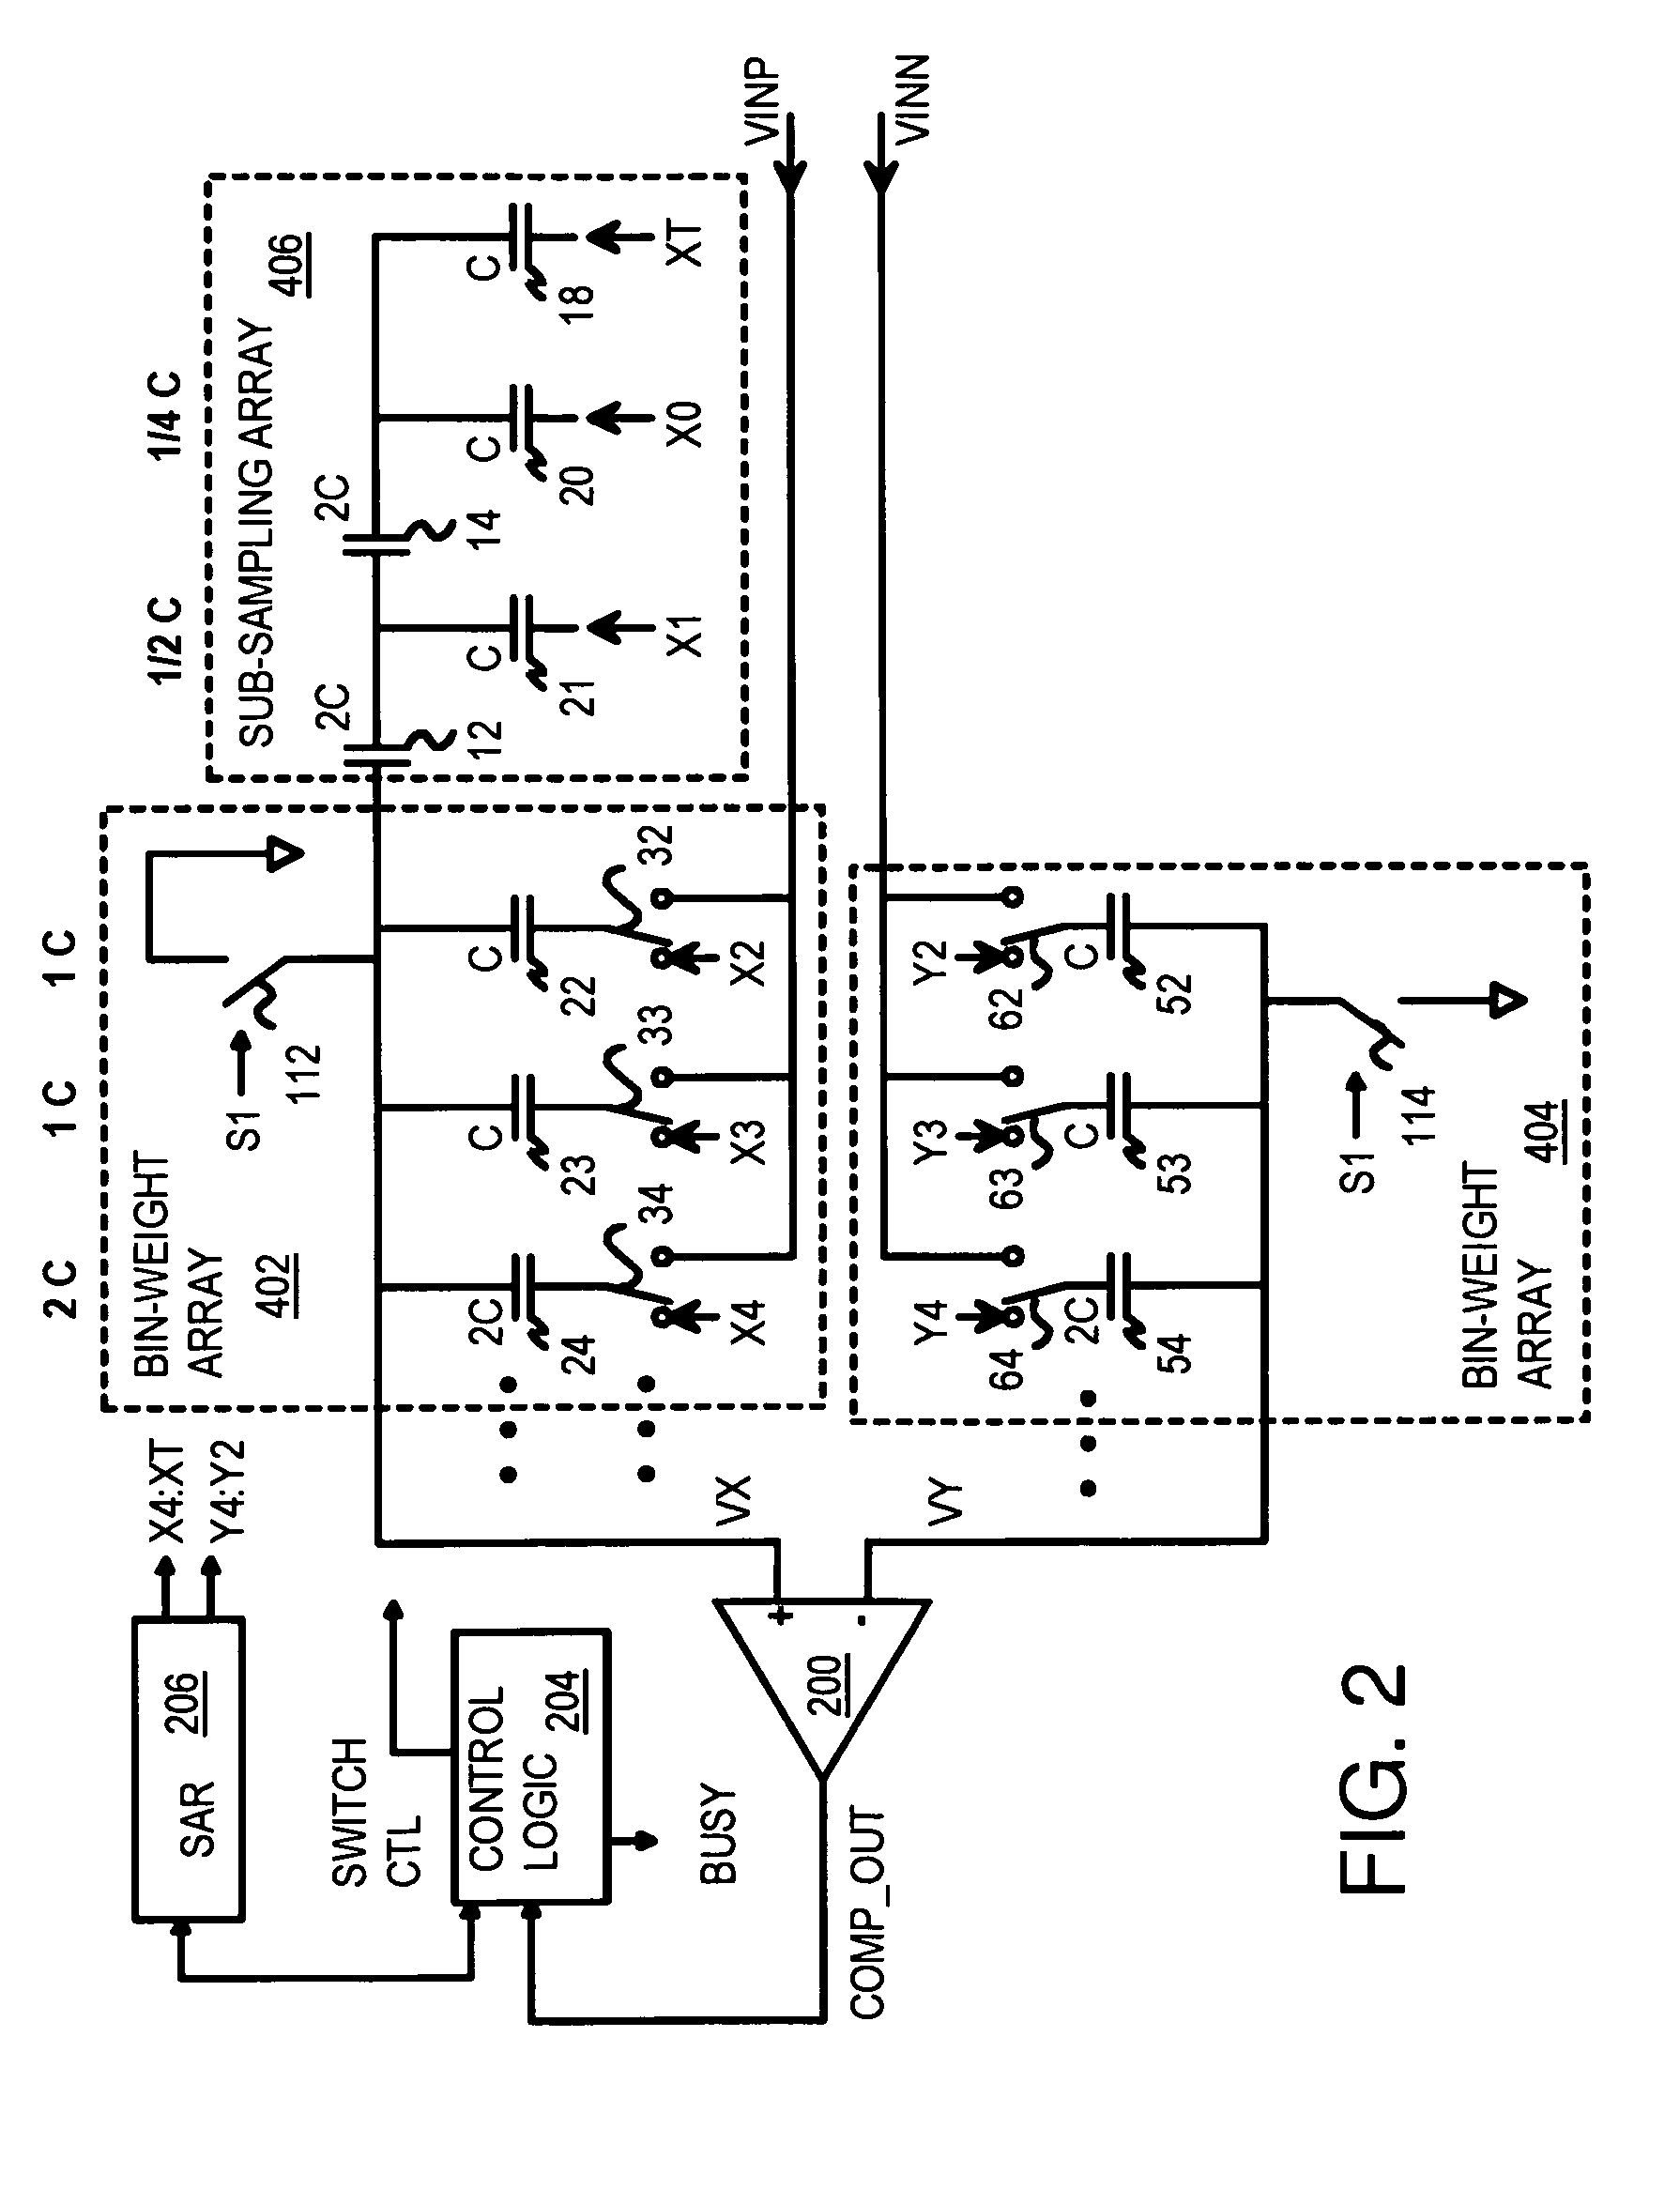 Hybrid analog-to-digital converter (ADC) with binary-weighted-capacitor sampling array and a sub-sampling charge-redistributing array for sub-voltage generation